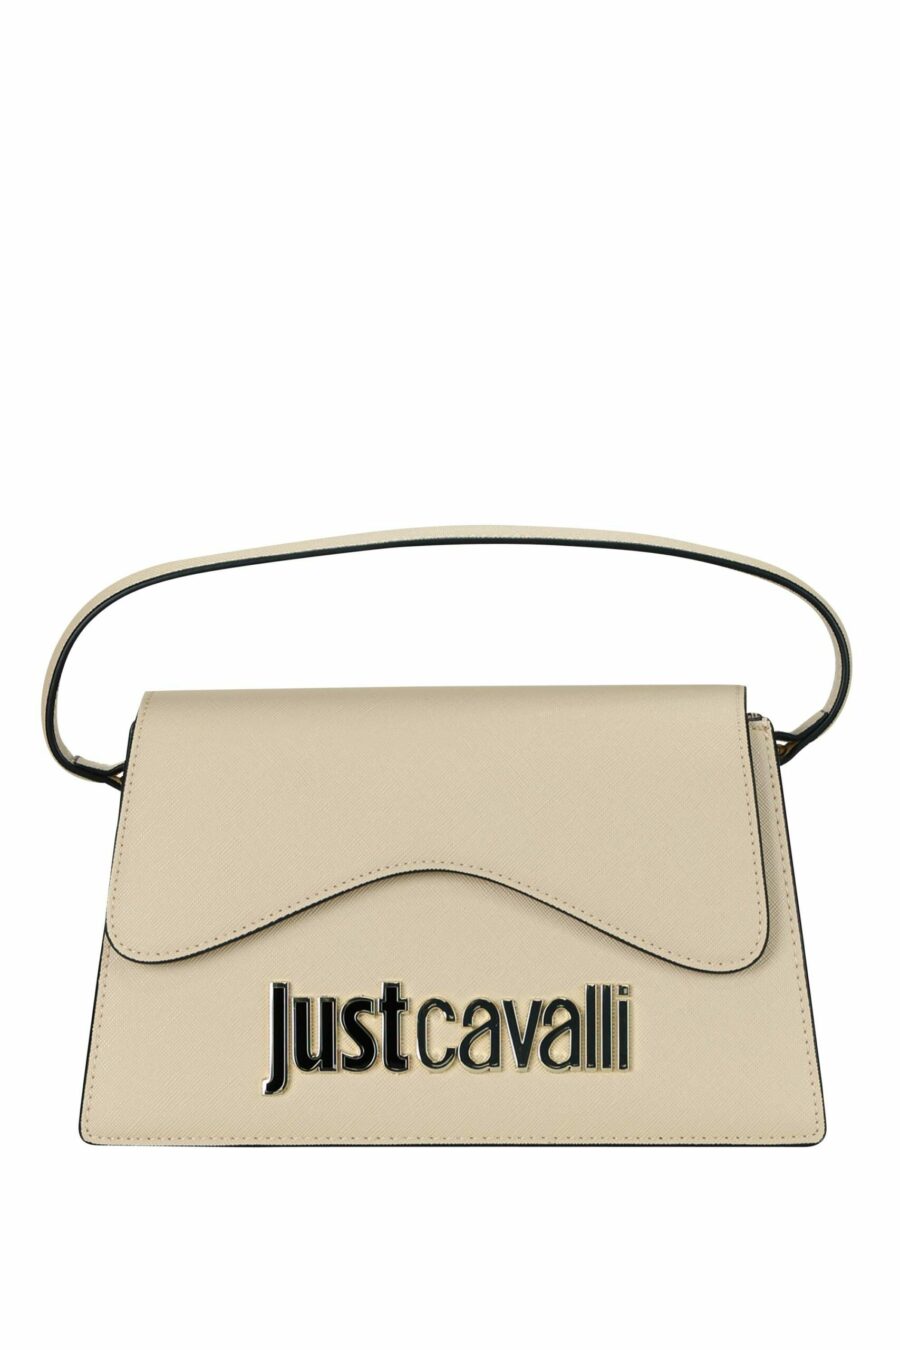 Beige shoulder bag with flap with silver lettering maxilogo - 8052672641670 scaled